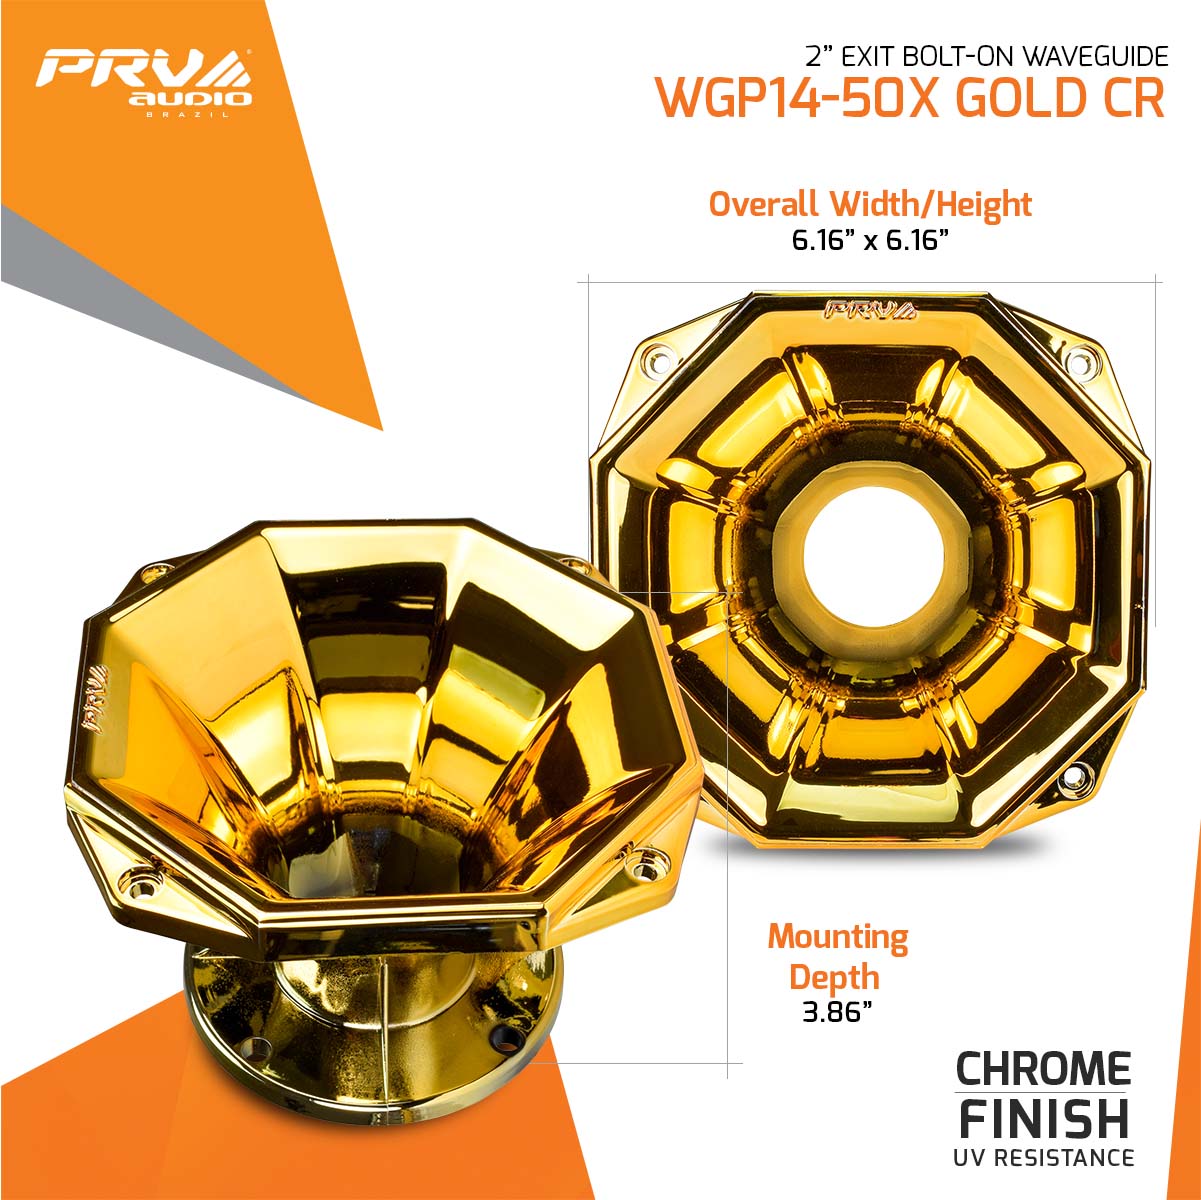 WGP14-50X - Dims Infographic - GOLD CR